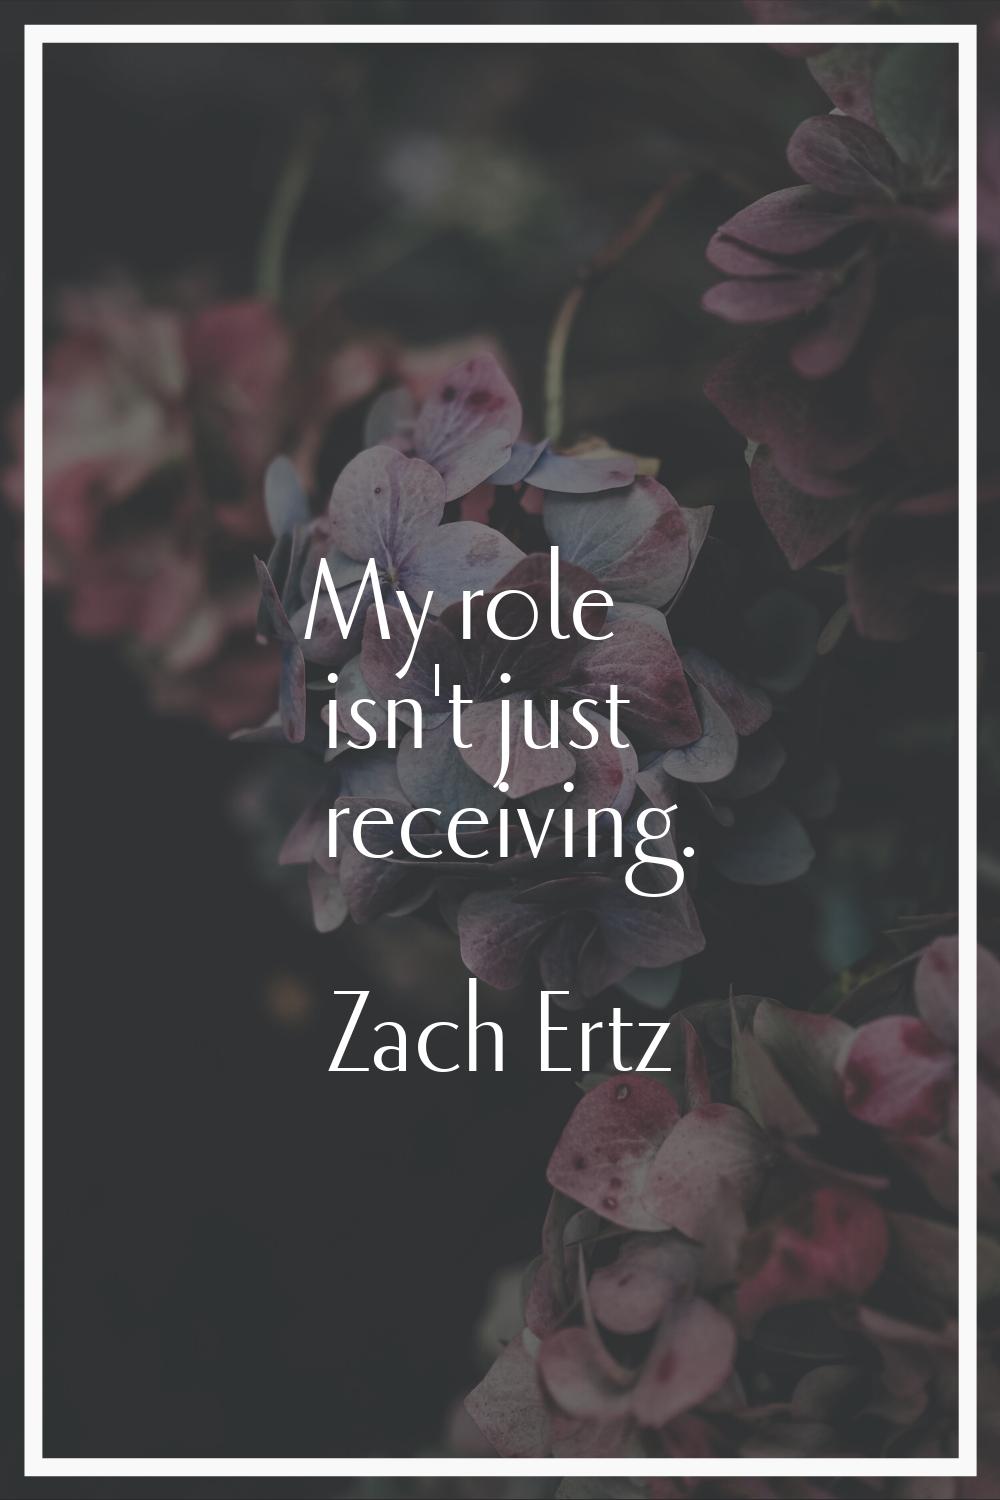 My role isn't just receiving.